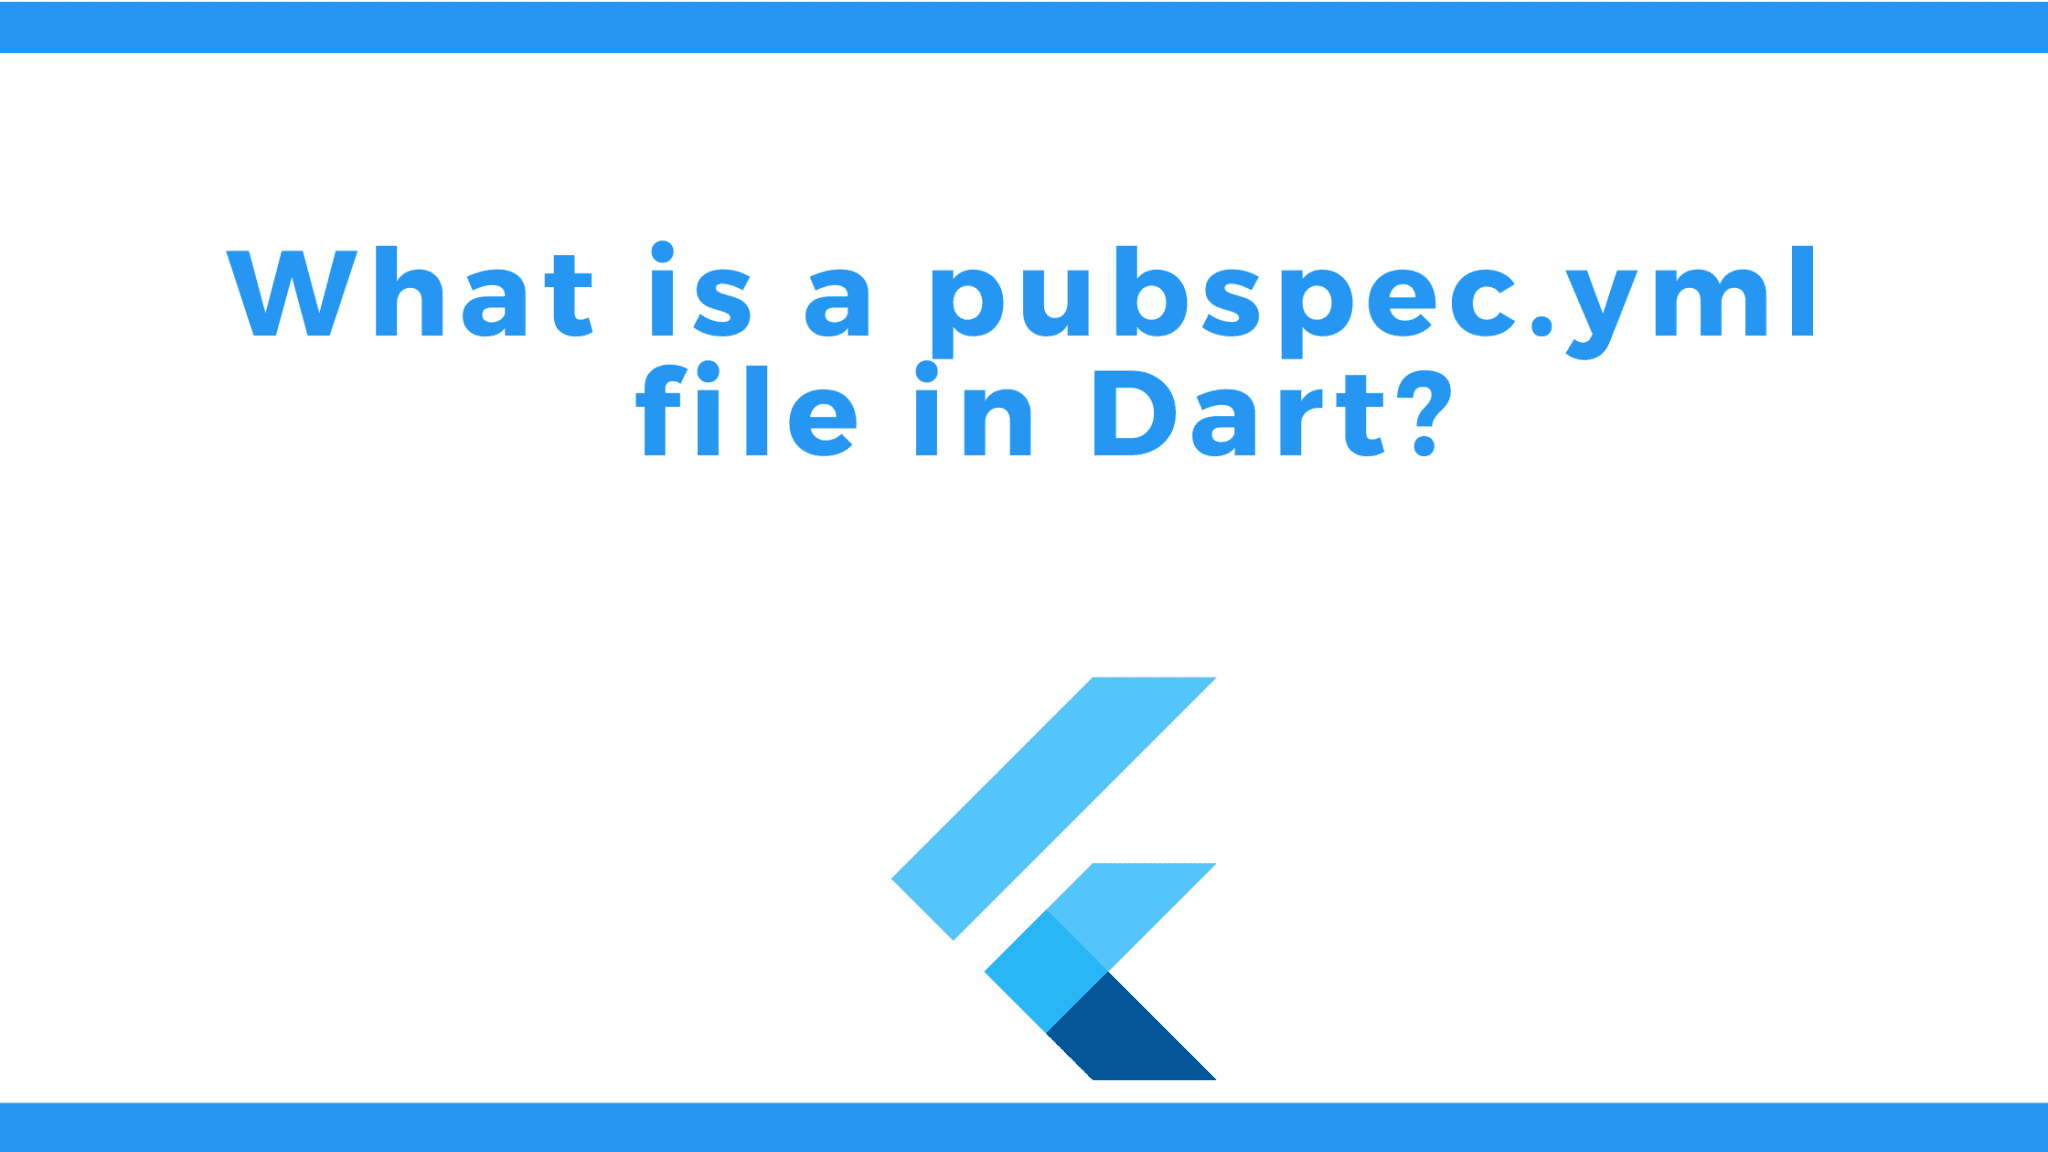 What is a pubspec file in Dart?